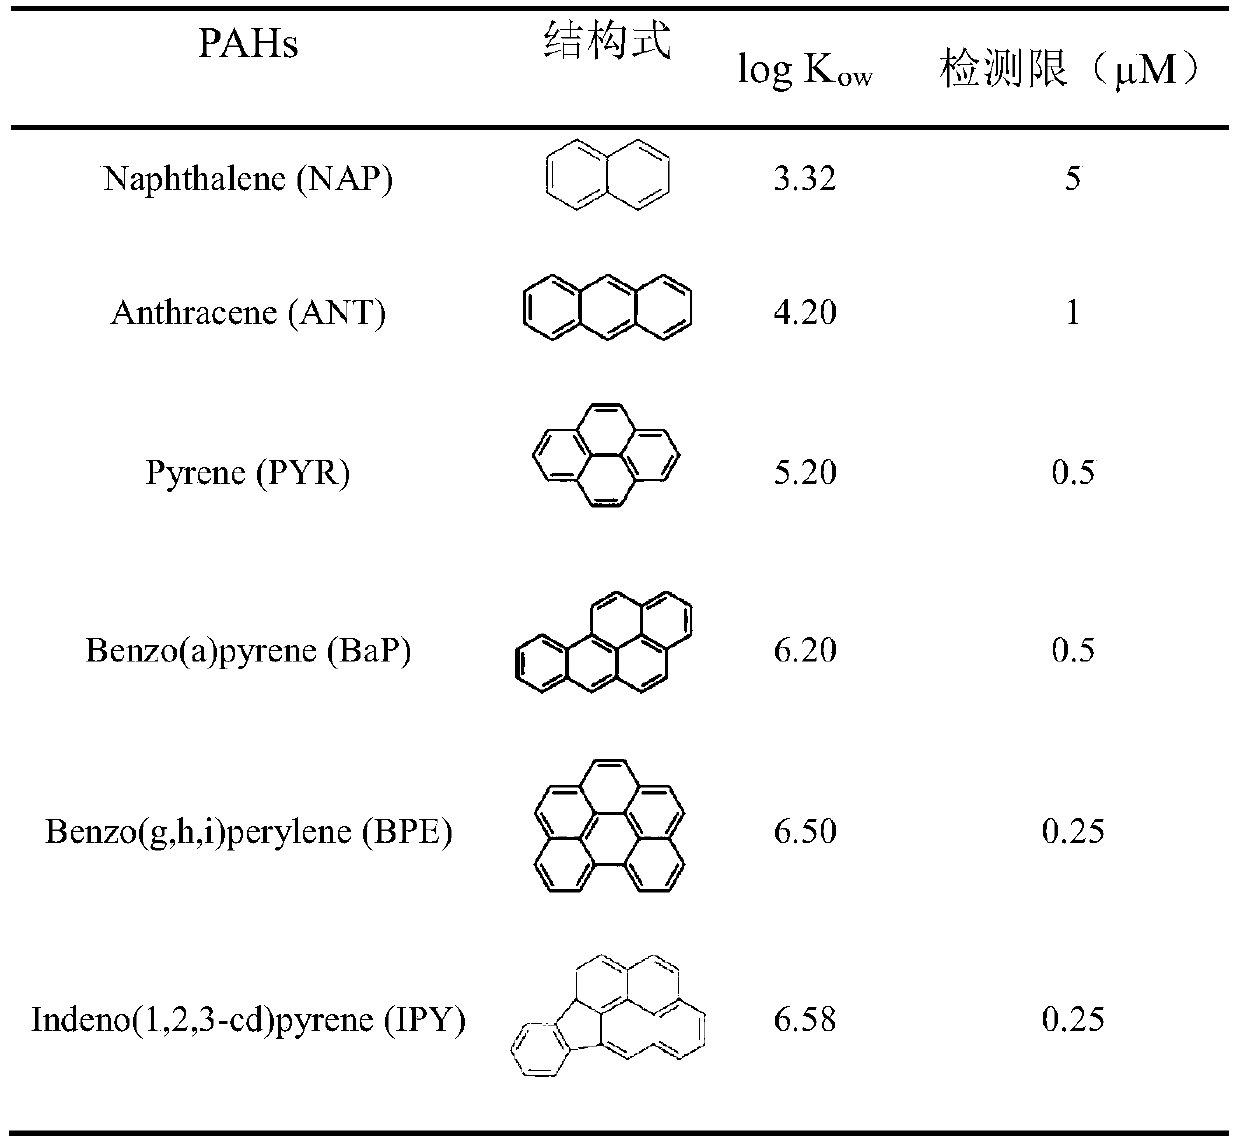 Polycyclic aromatic hydrocarbon detection method based on coffee-ring effect